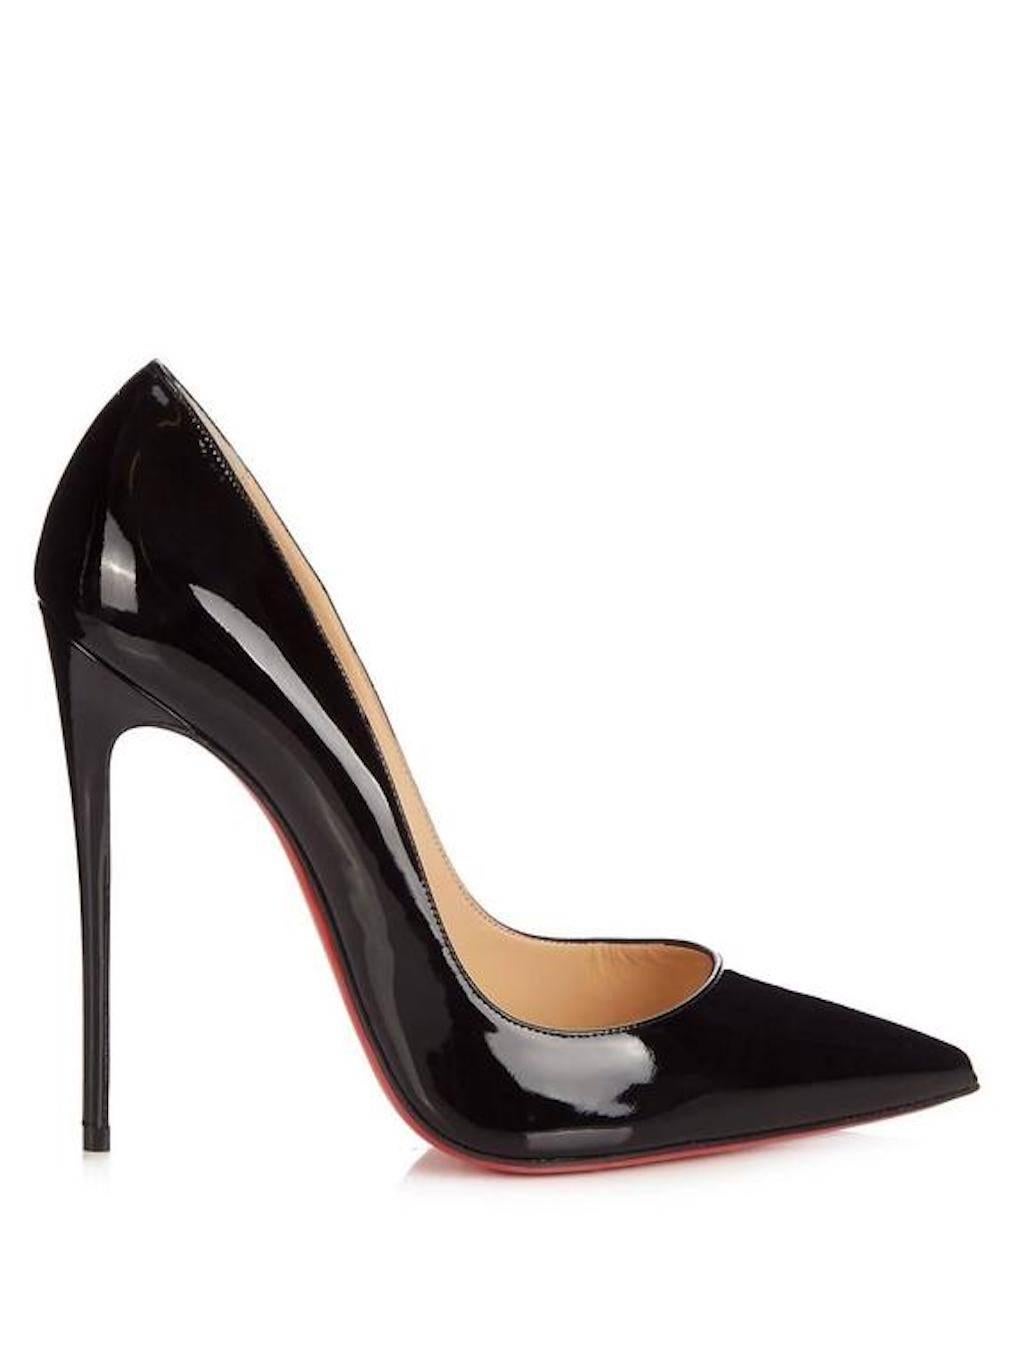 Women's Christian Louboutin New Sold Out Black Patent Leather So Kate Pumps Heels in Box